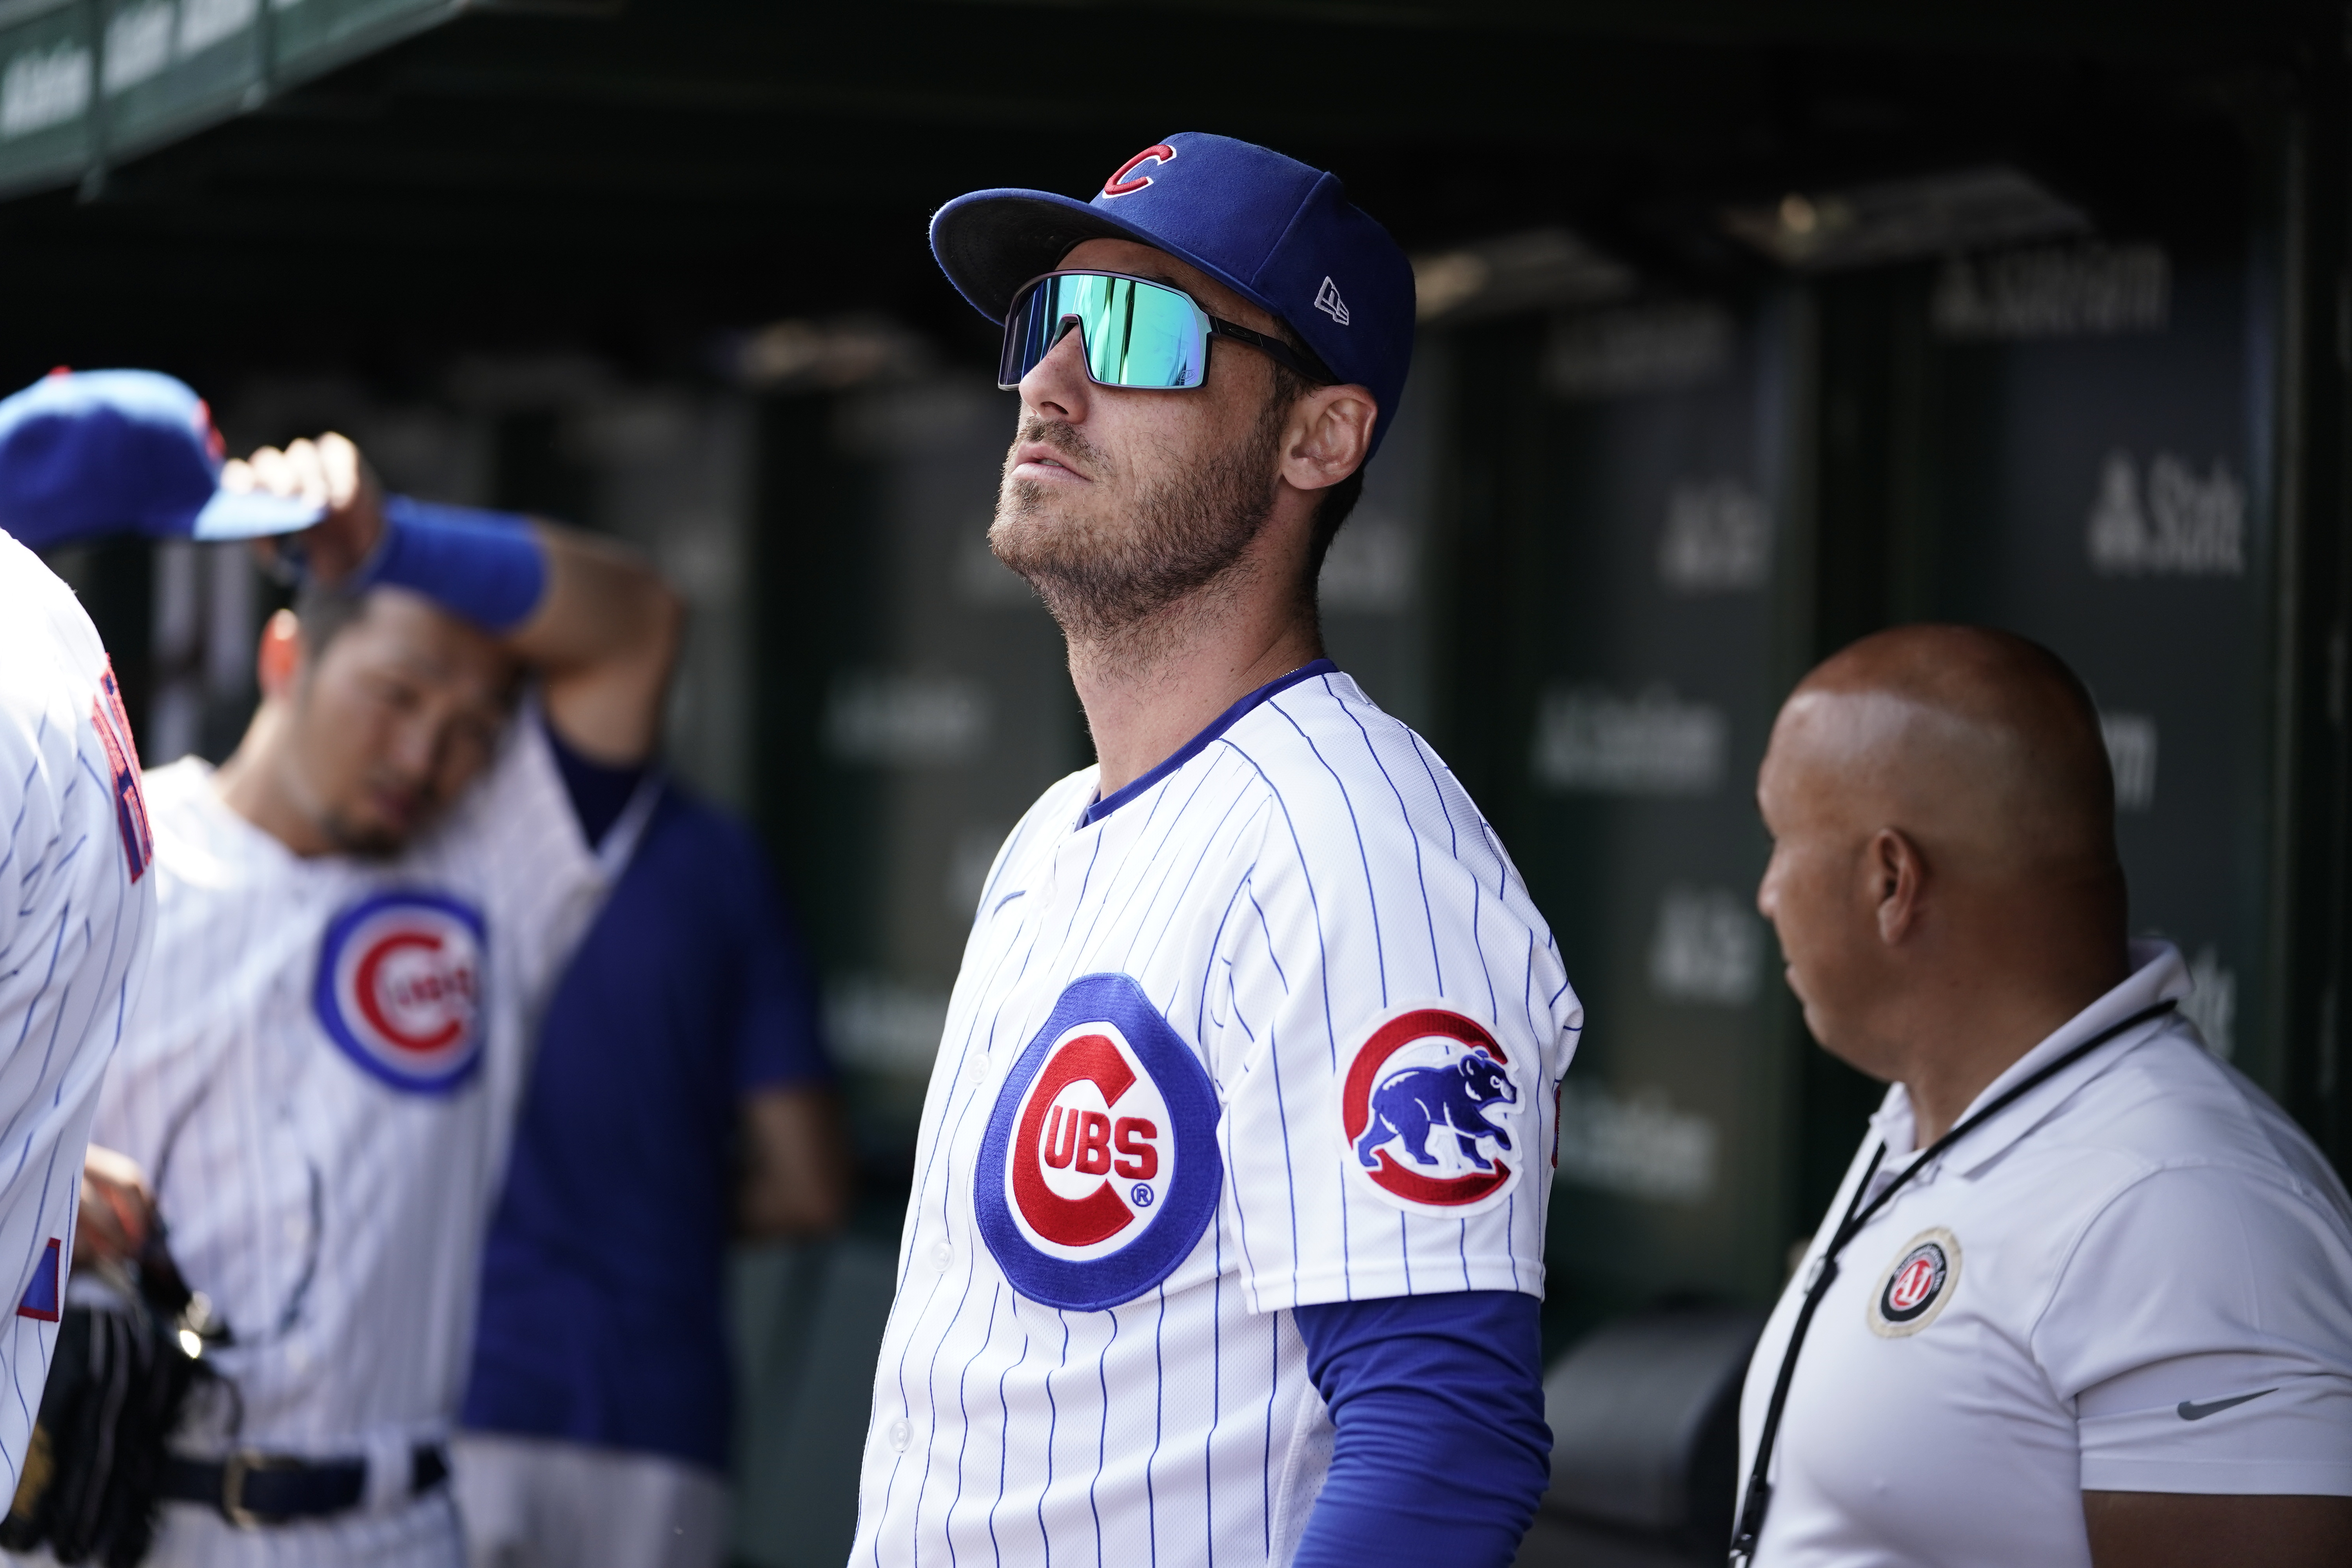 Cody Bellinger of the Chicago Cubs stands in the dugout prior to a game against the Arizona Diamondbacks at Wrigley Field on September 10, 2023 in Chicago, Illinois.